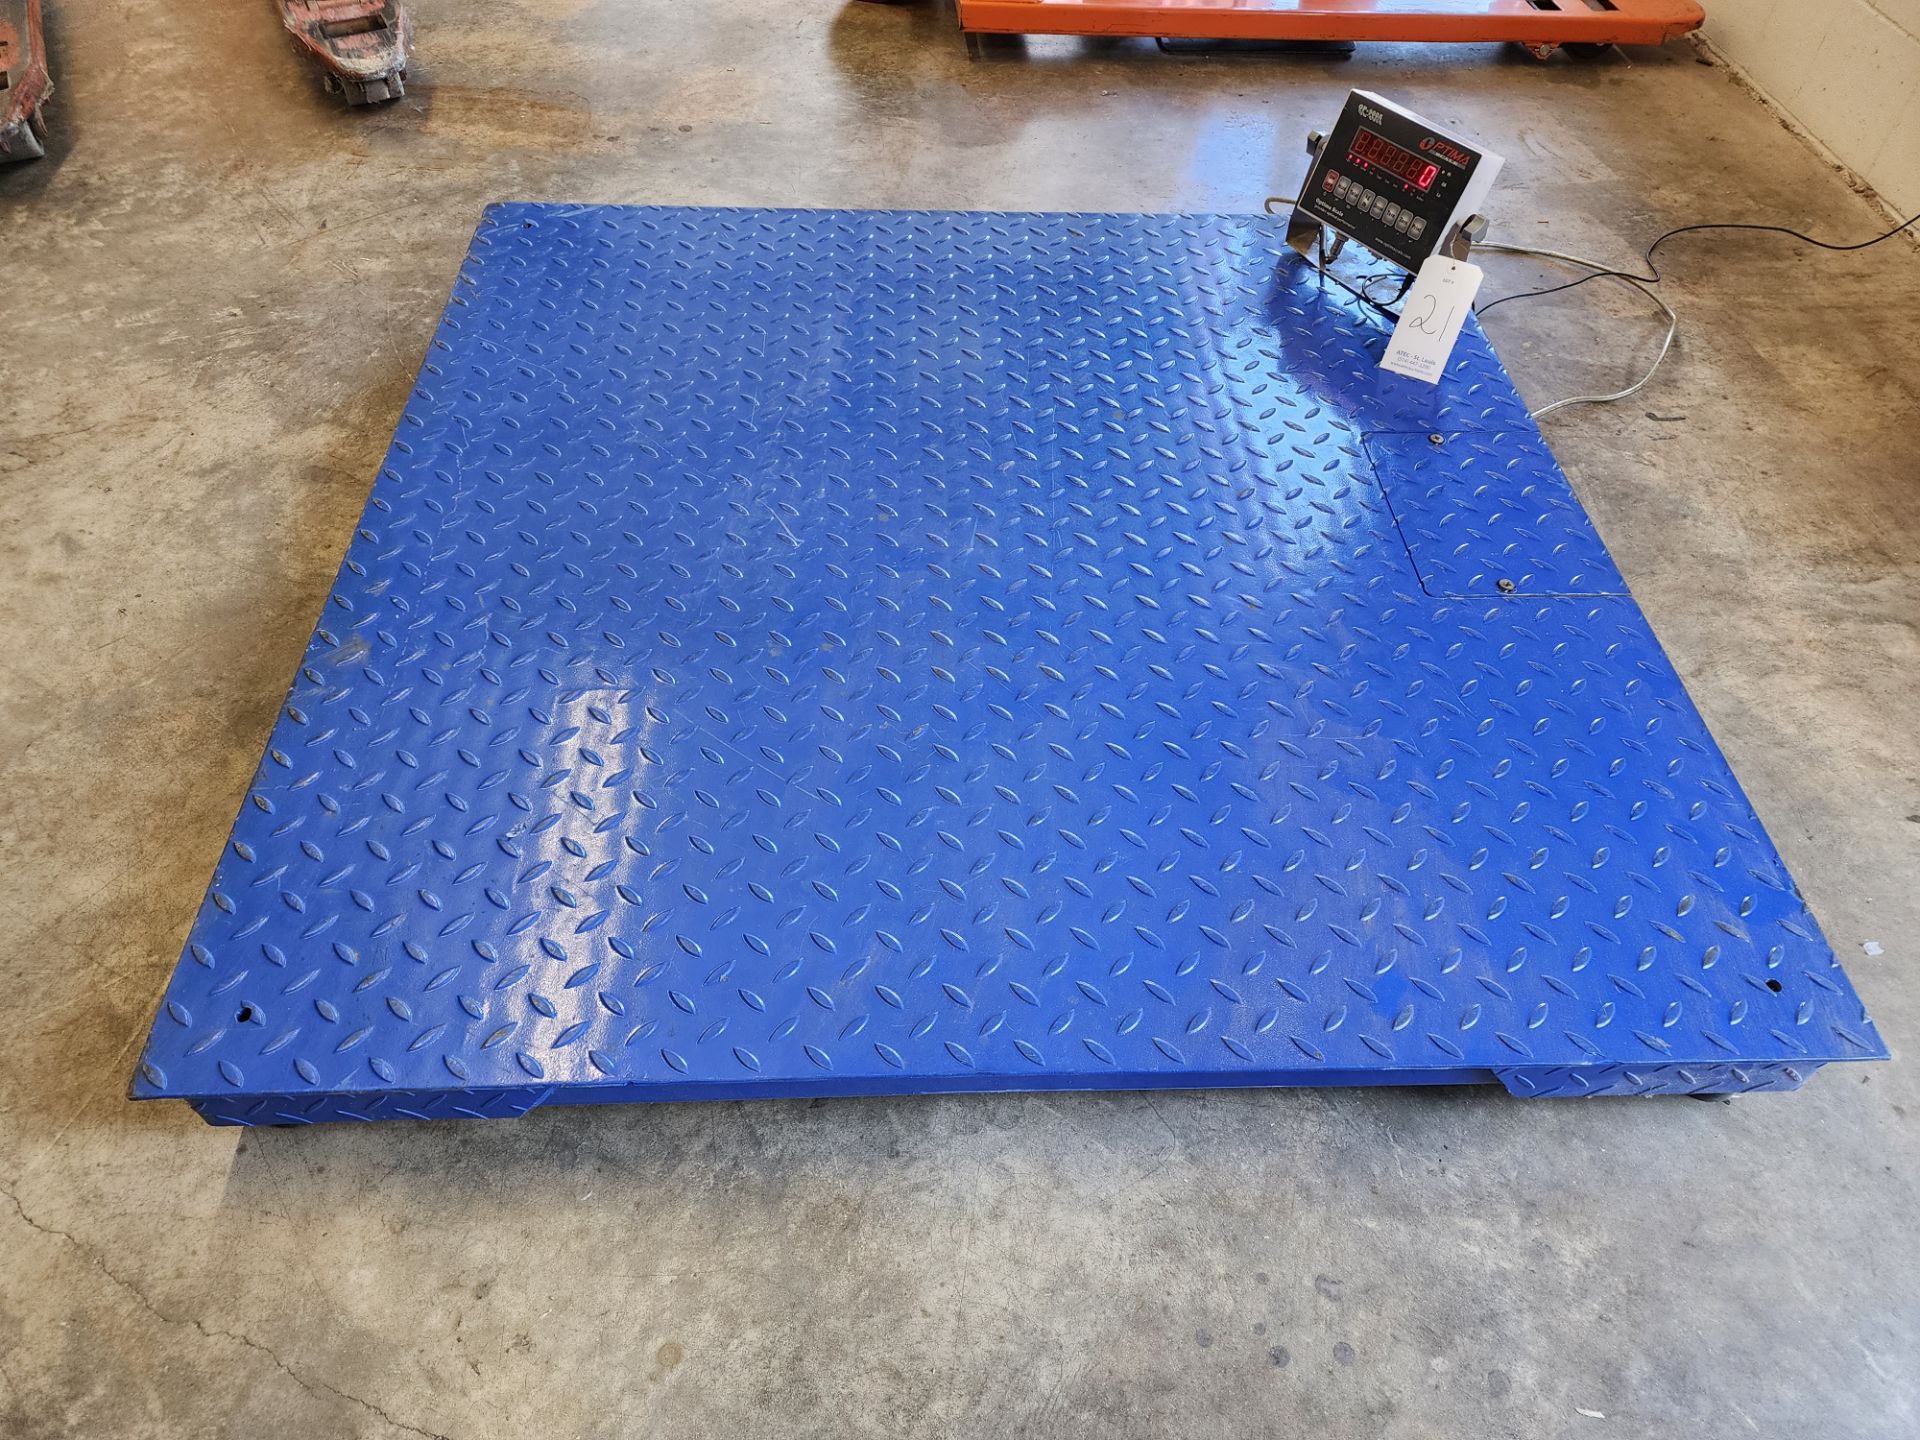 Locosc Precision Technology 4'x4' Floor Scale, 5,000-Lb Capacity w/LED Display - Image 6 of 6